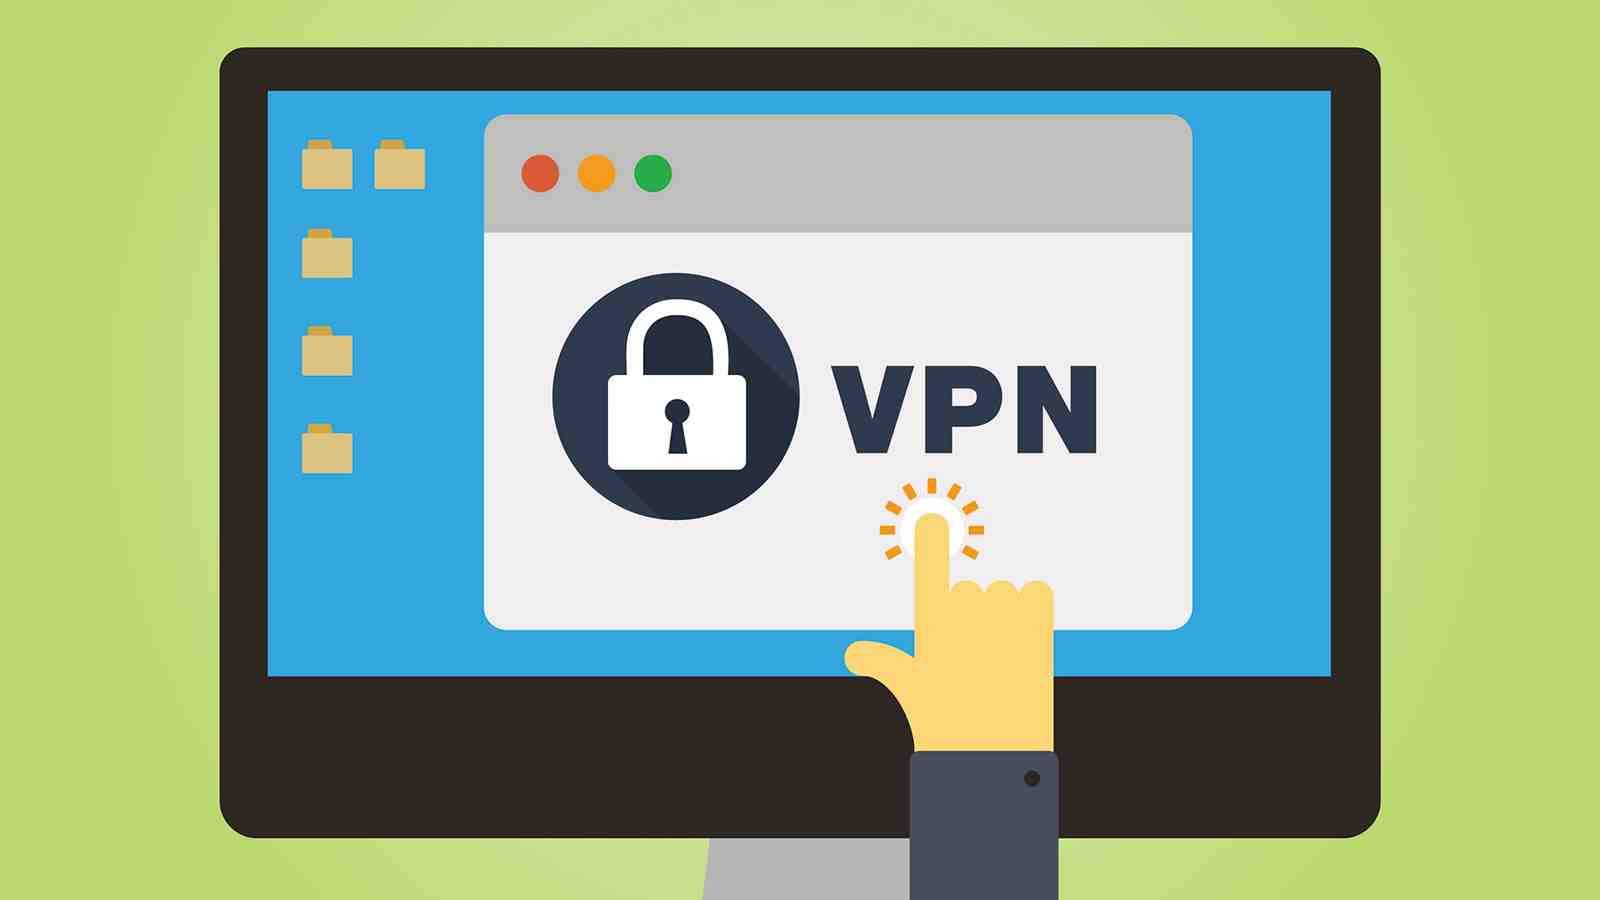 Does Chrome have built in VPN?